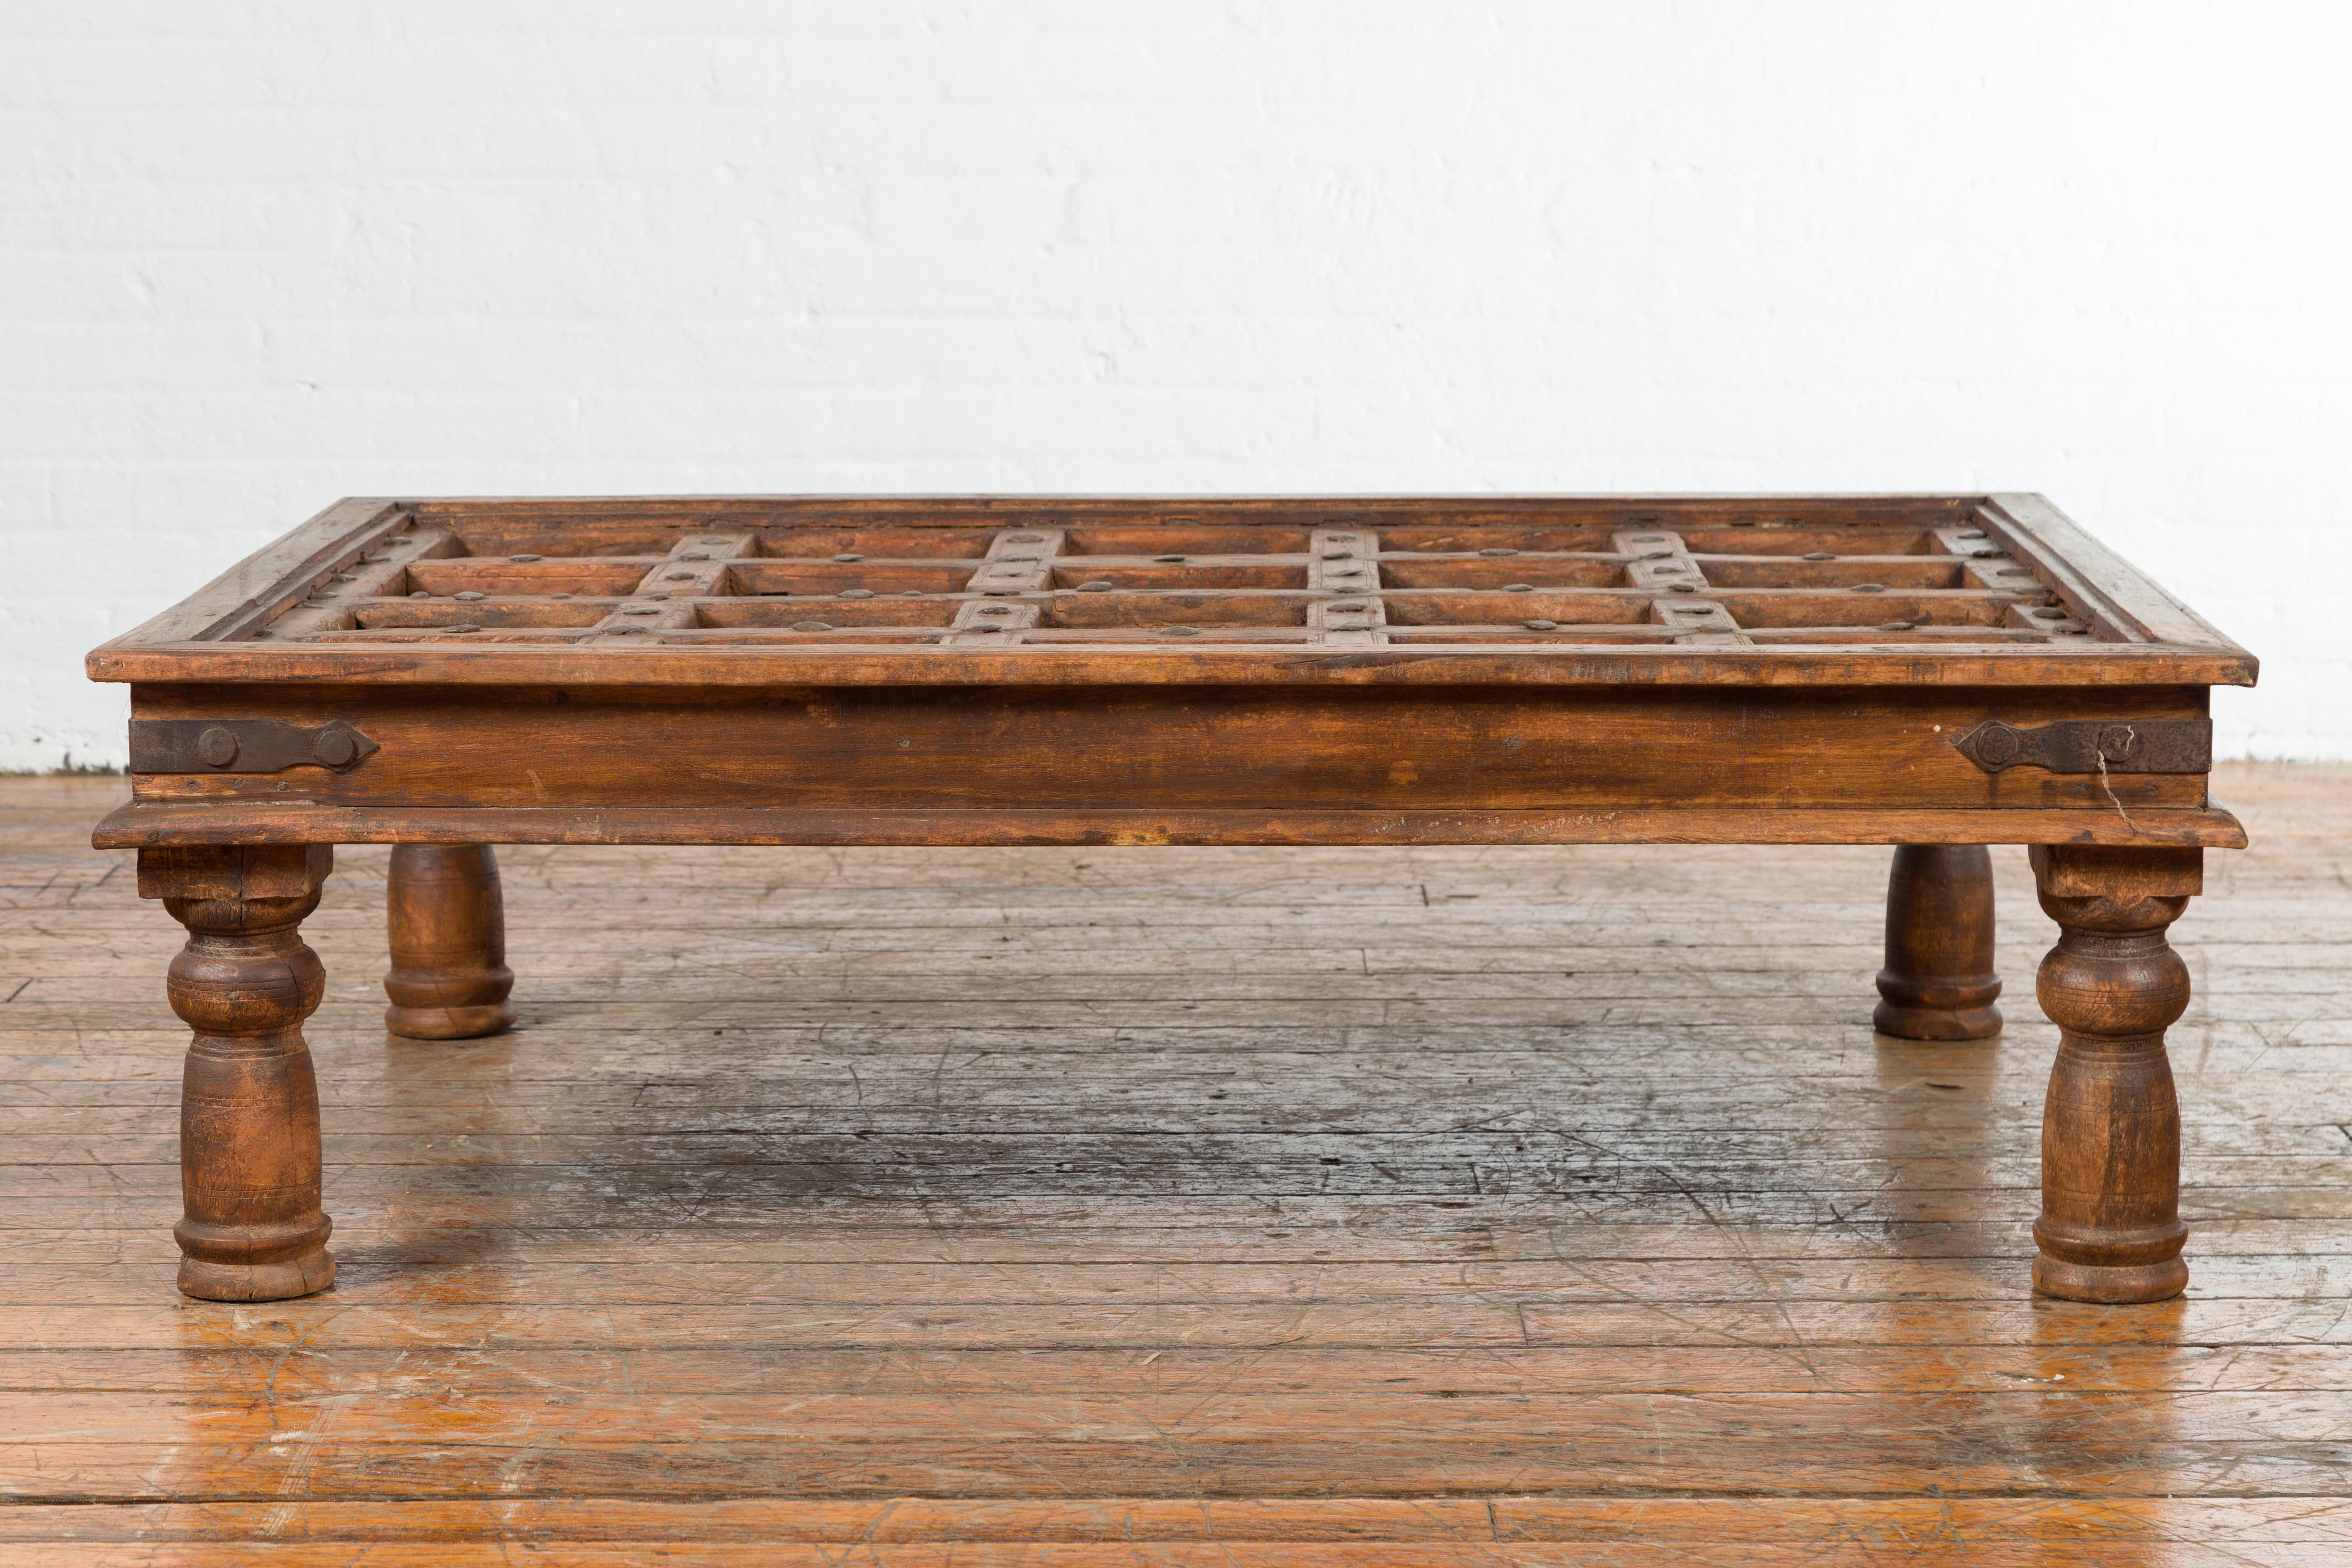 Indian 19th Century Paneled Door with Iron Accents Turned into a Coffee Table 6